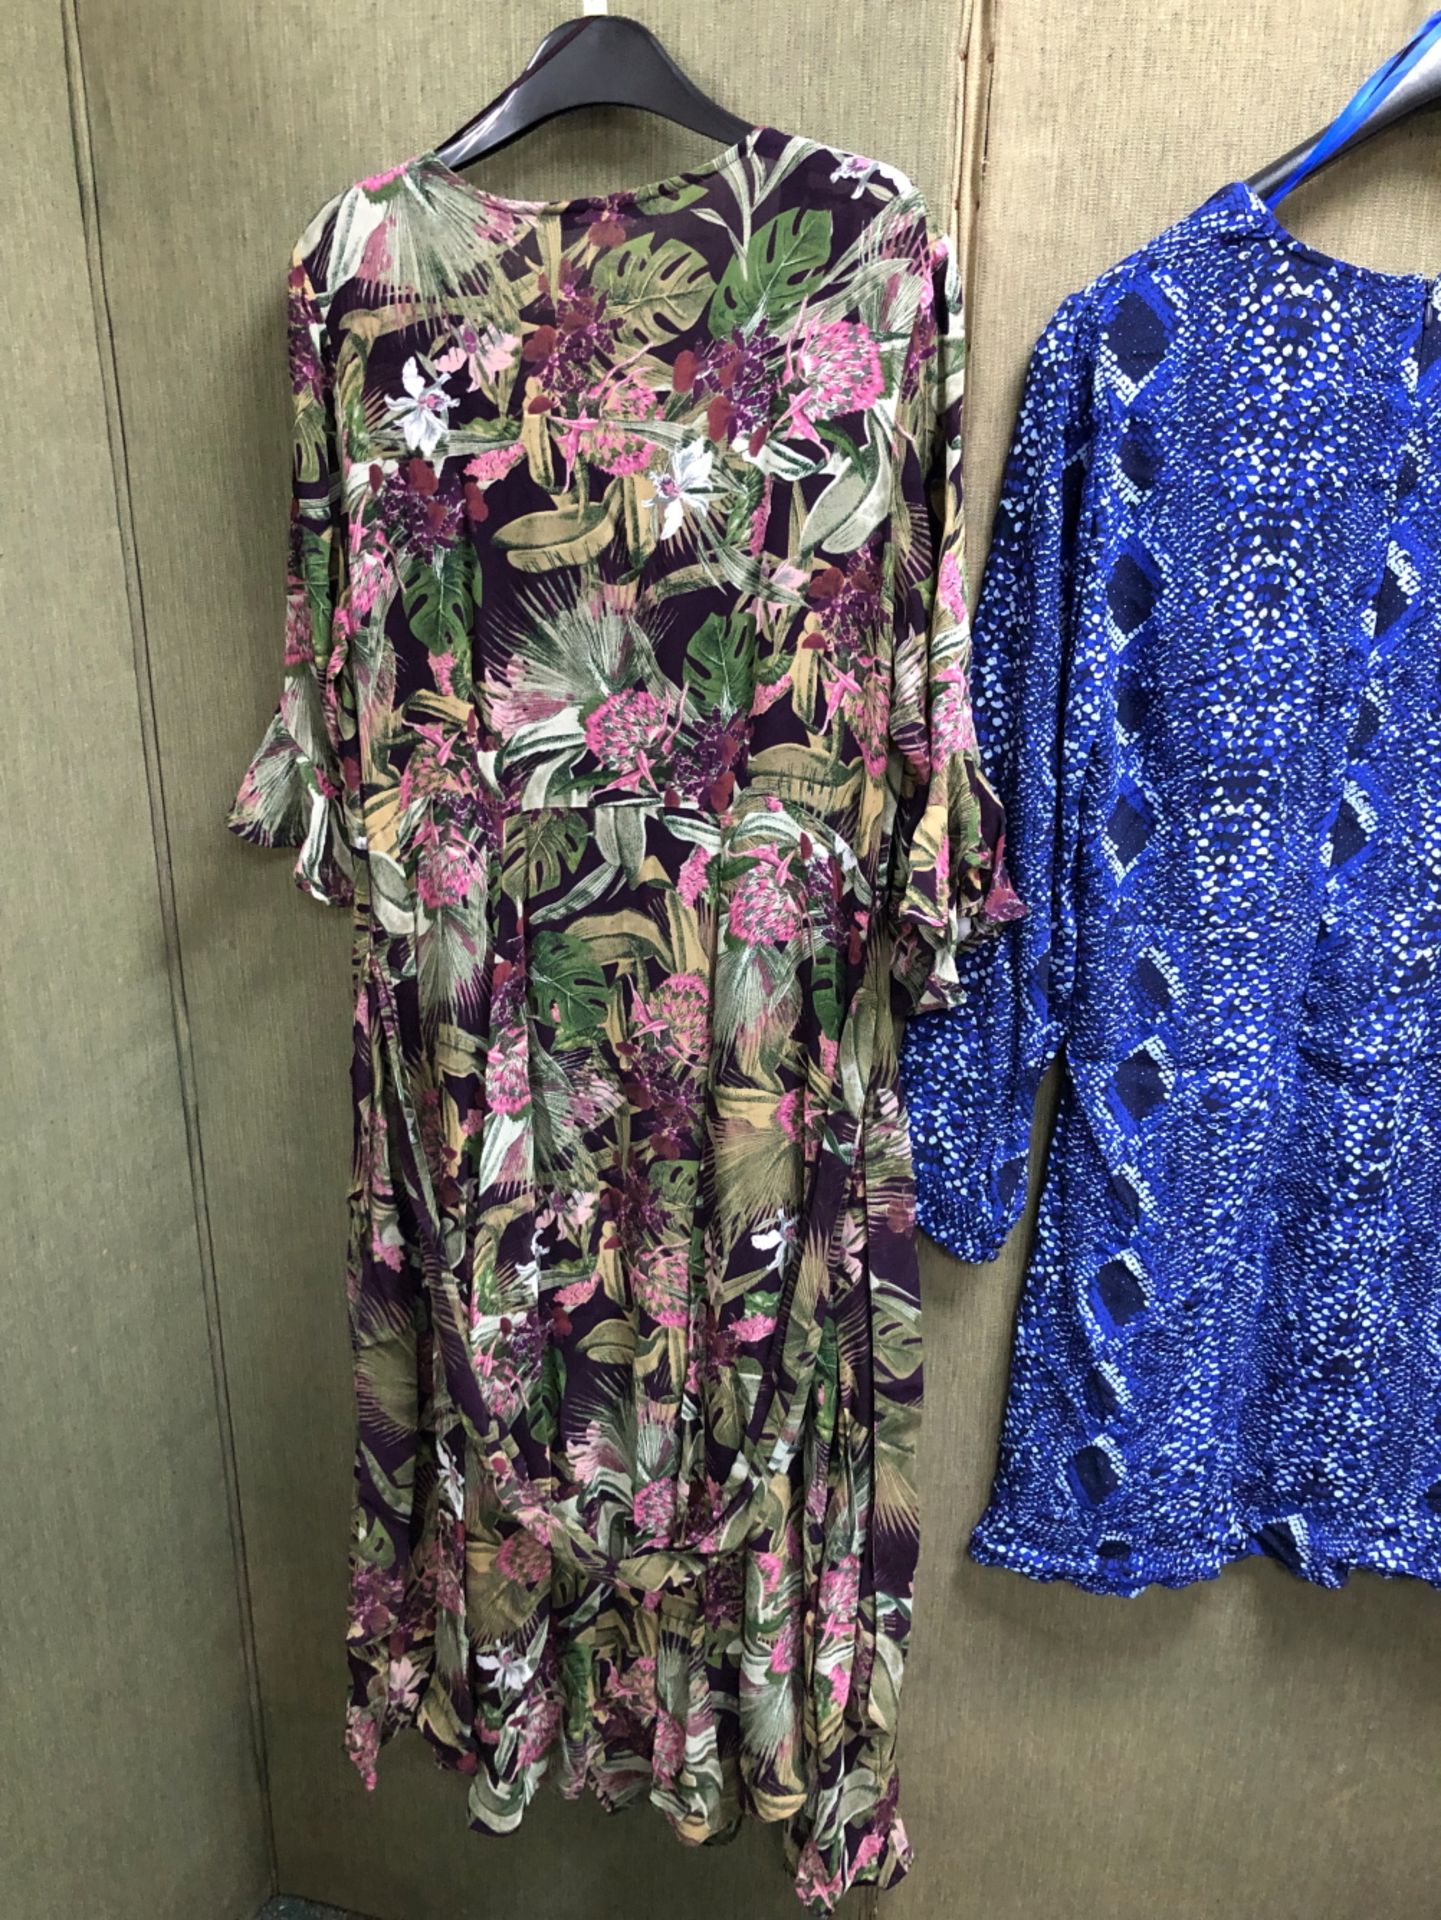 TWO M&S DRESSES, ONE GREEN FLORAL PRINT WITH CAMI UNDER DRESS SIZE UK 12, AND A SHORTER BLUE - Image 9 of 10